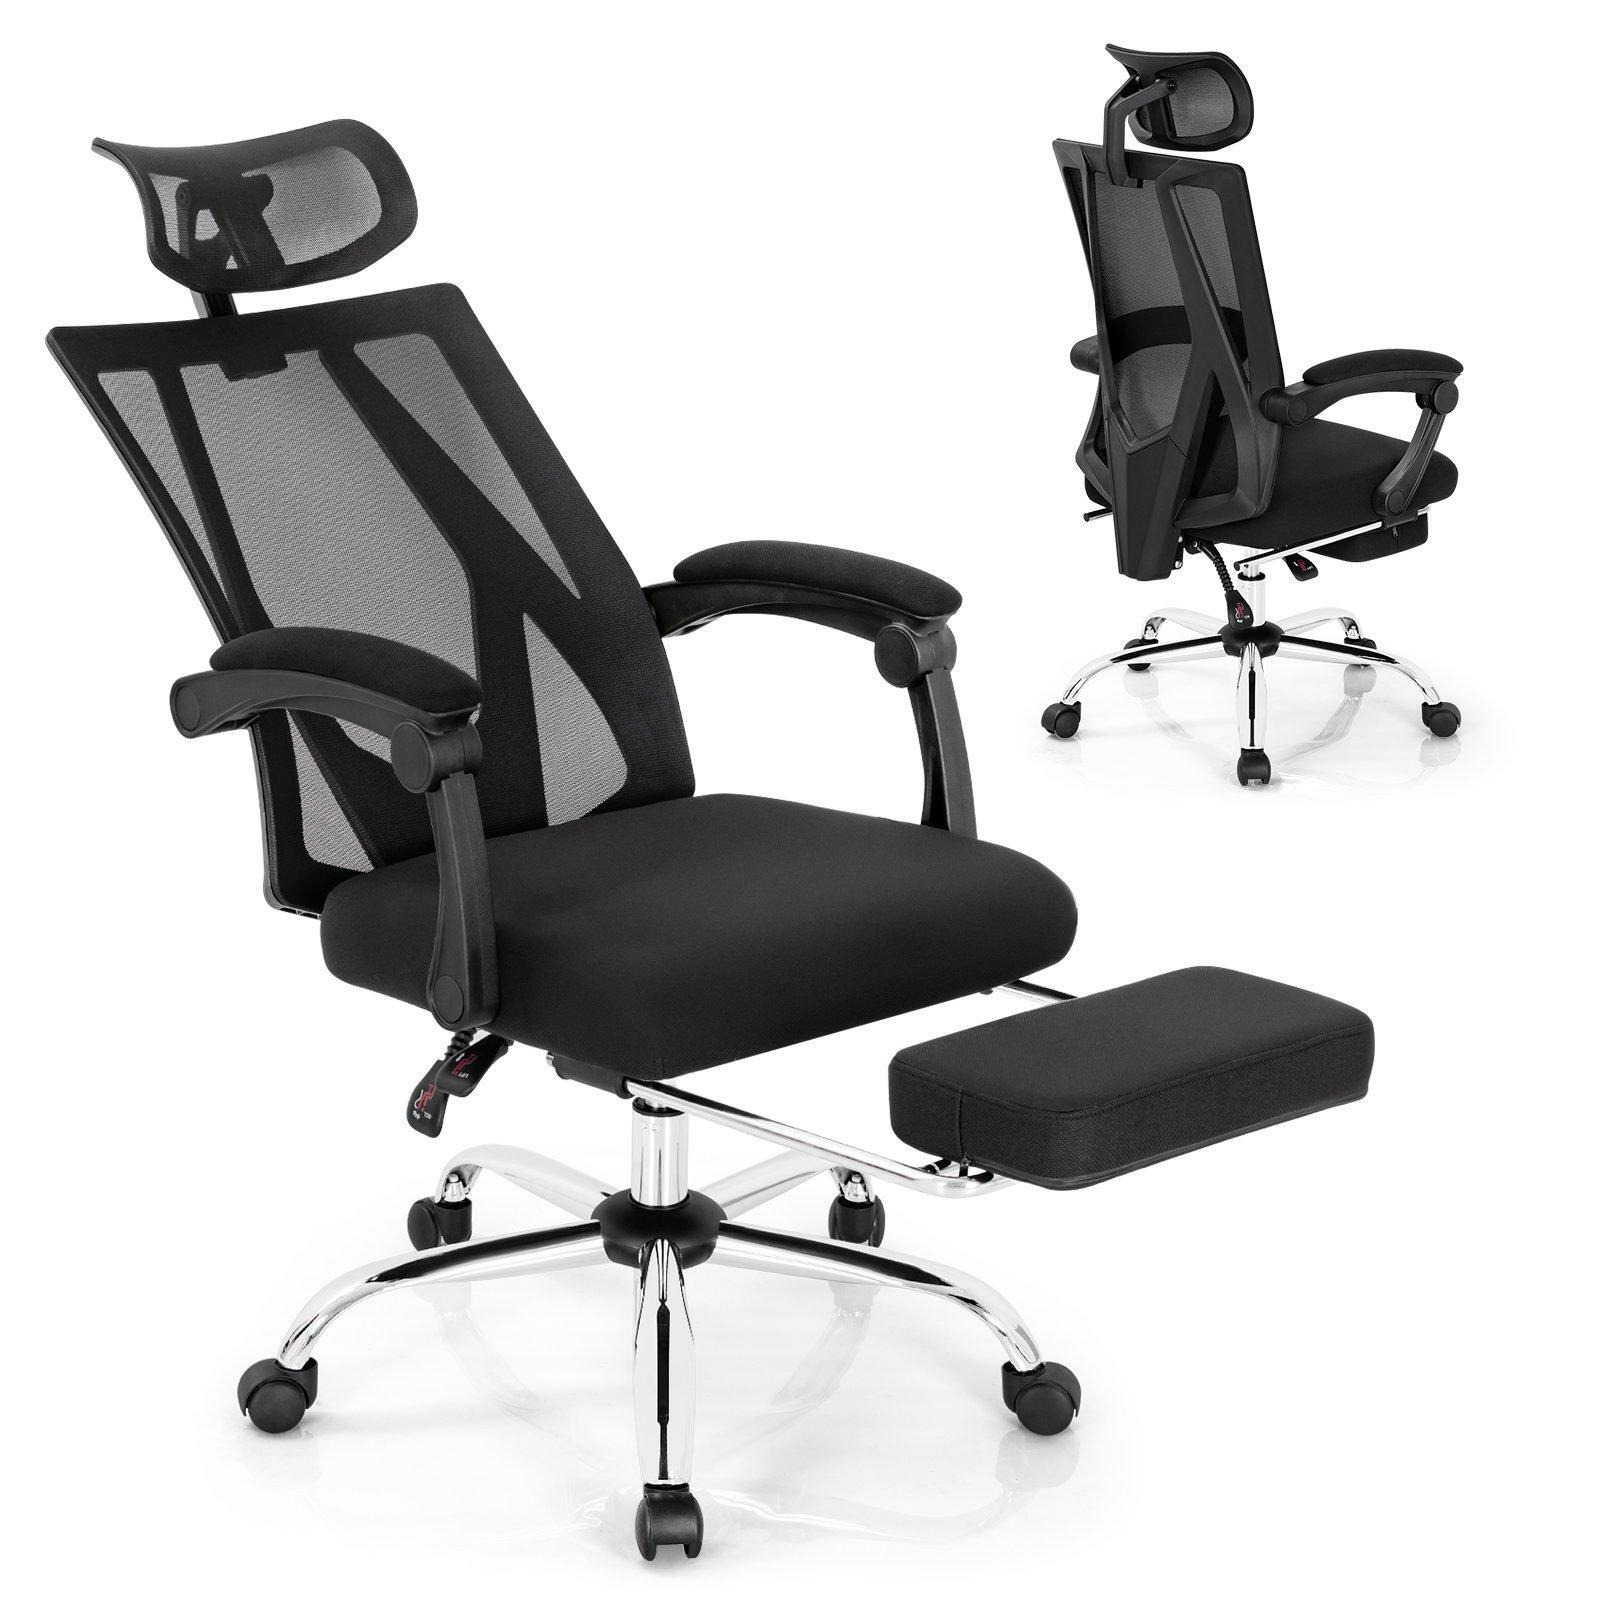 Ergonomic Executive Office Chair High Back Reclining Chair Retractable Footrest - image 1